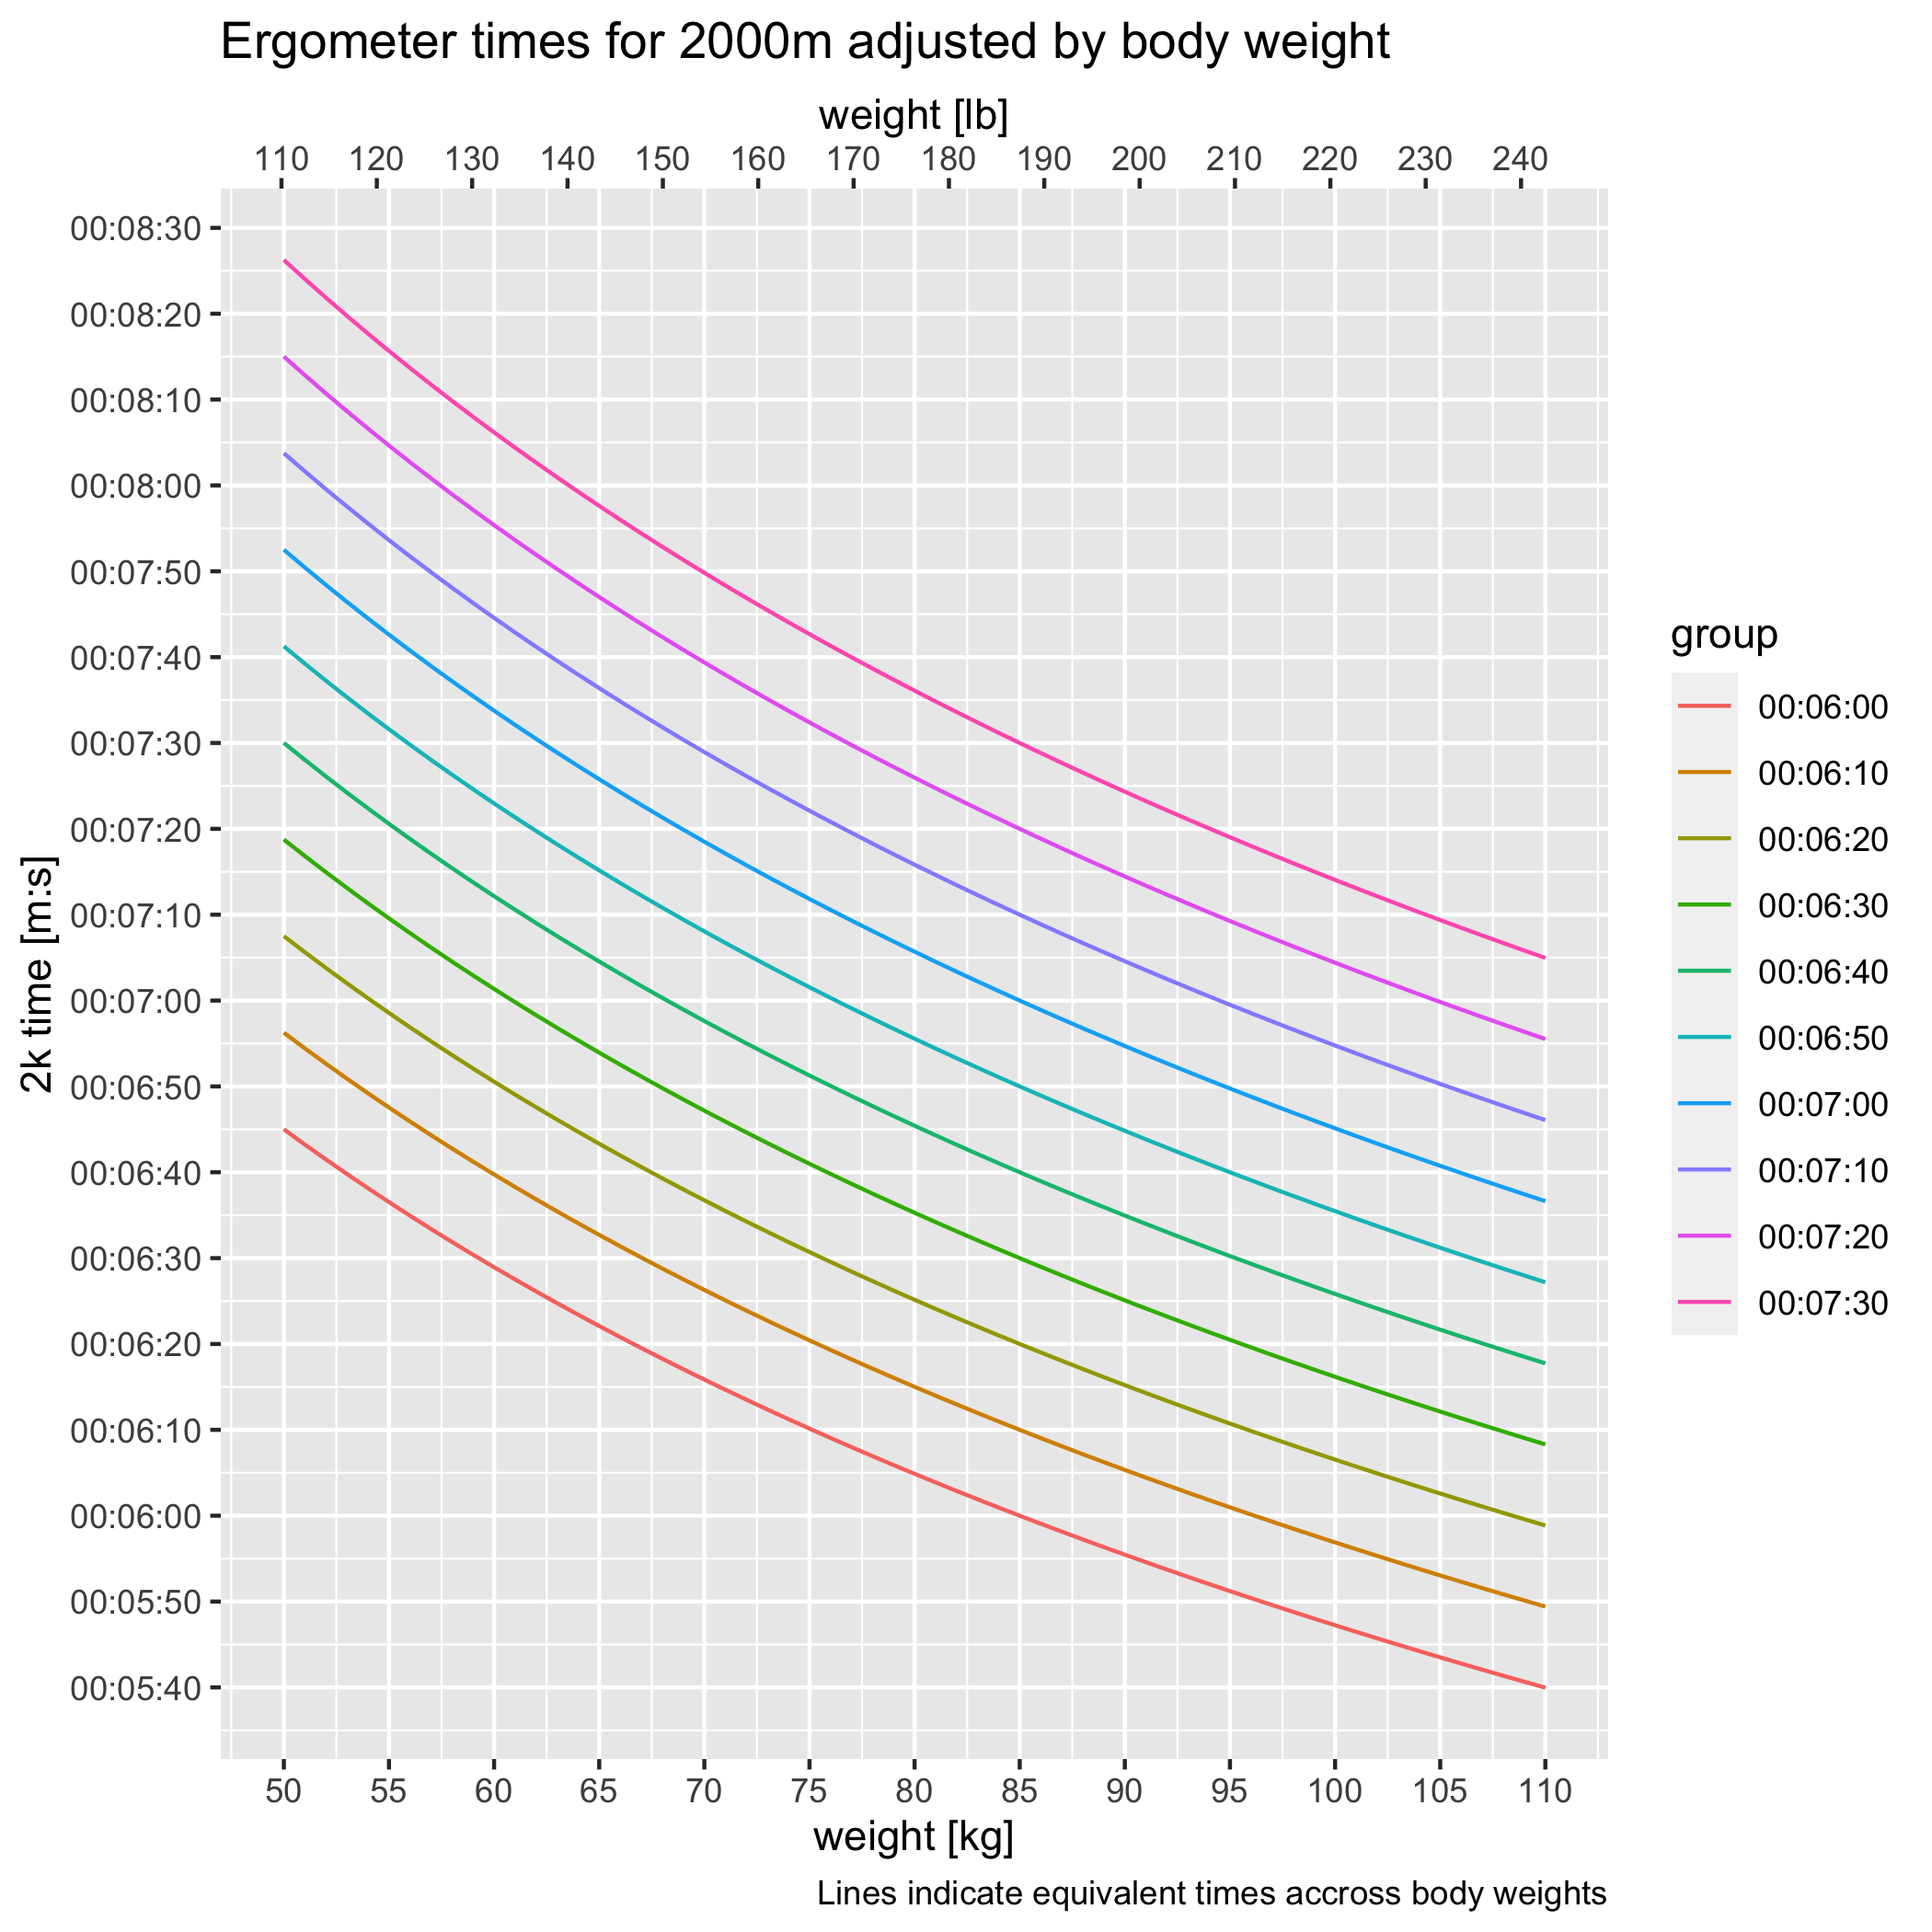 Relation between body weight and 2k ergometer time